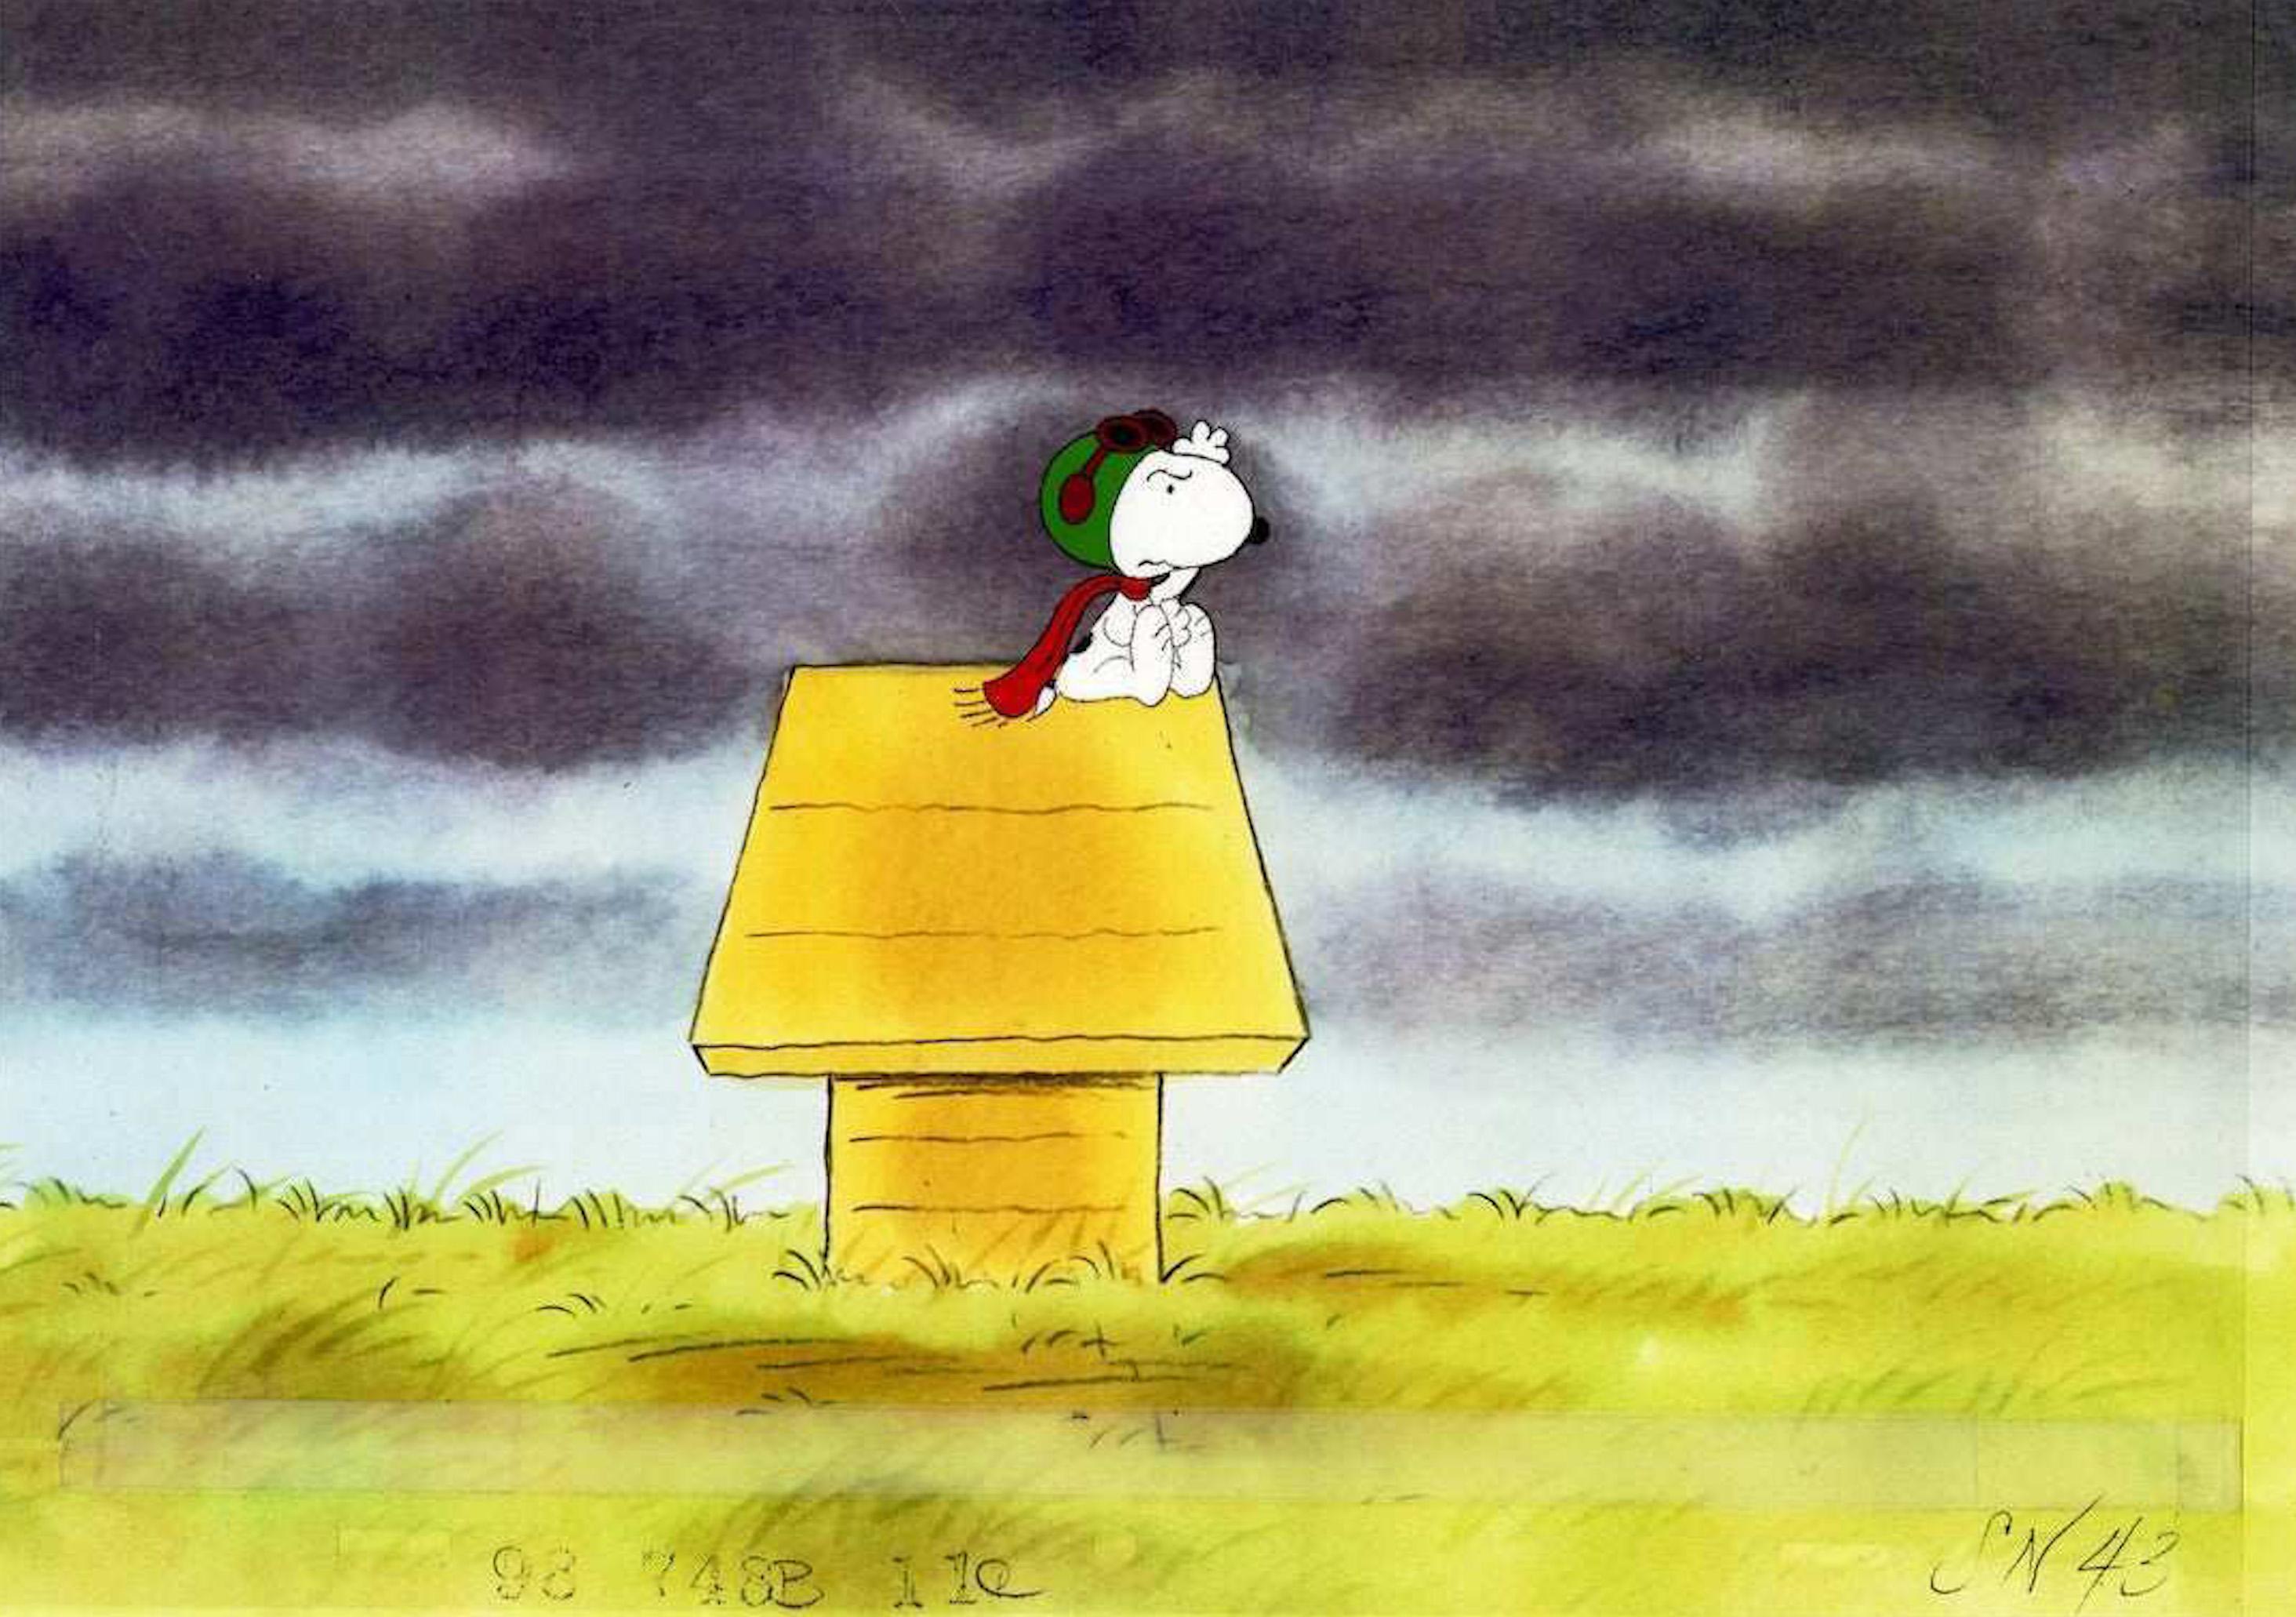 Peanuts Original Hand Drawn/Painted Production Cel: Snoopy - Art by Peanuts Fine Artists